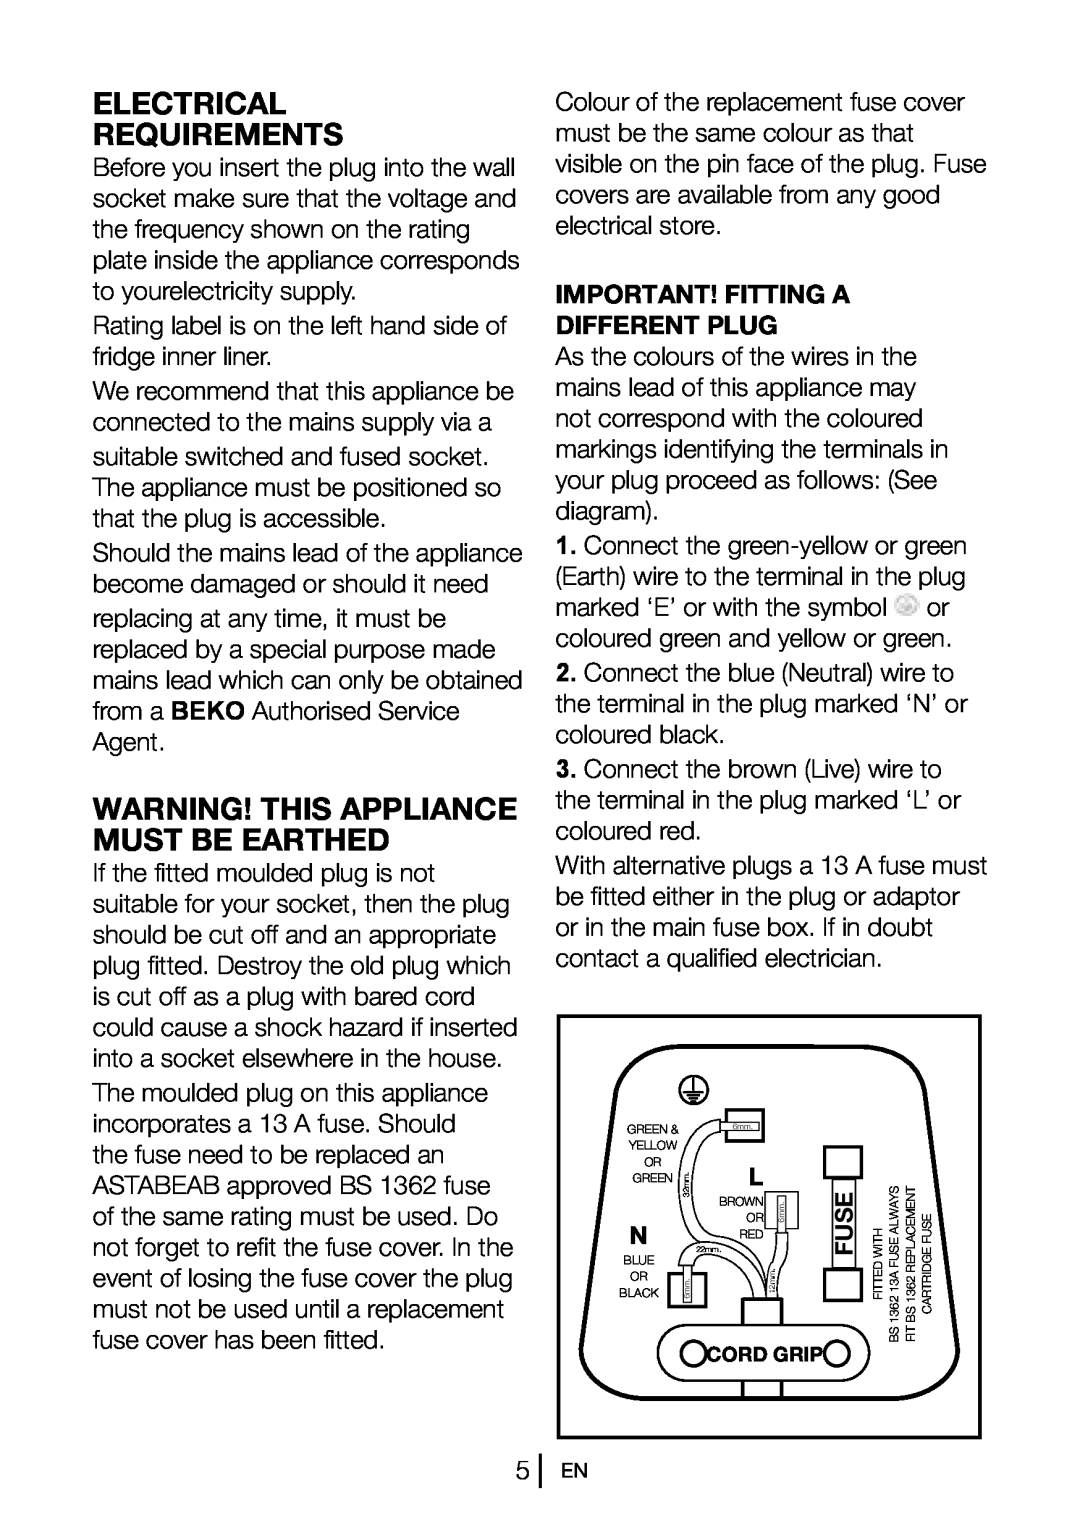 Beko BZ31 Electrical Requirements, Warning! This Appliance Must Be Earthed, Important! Fitting A Different Plug, Fuse 